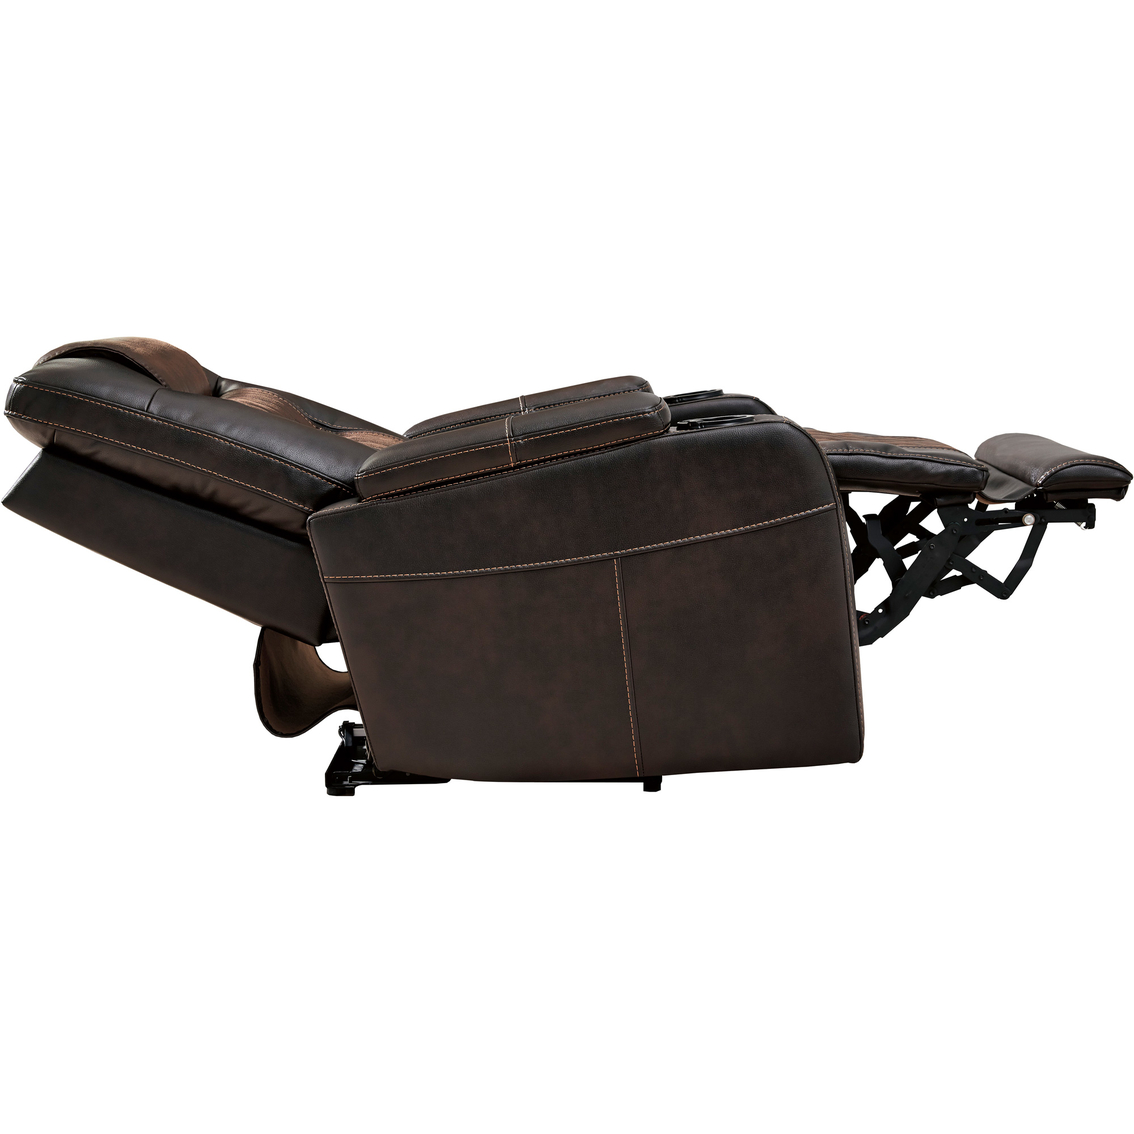 Signature Design by Ashley Composer Power Recliner with Adjustable Headrest - Image 3 of 8